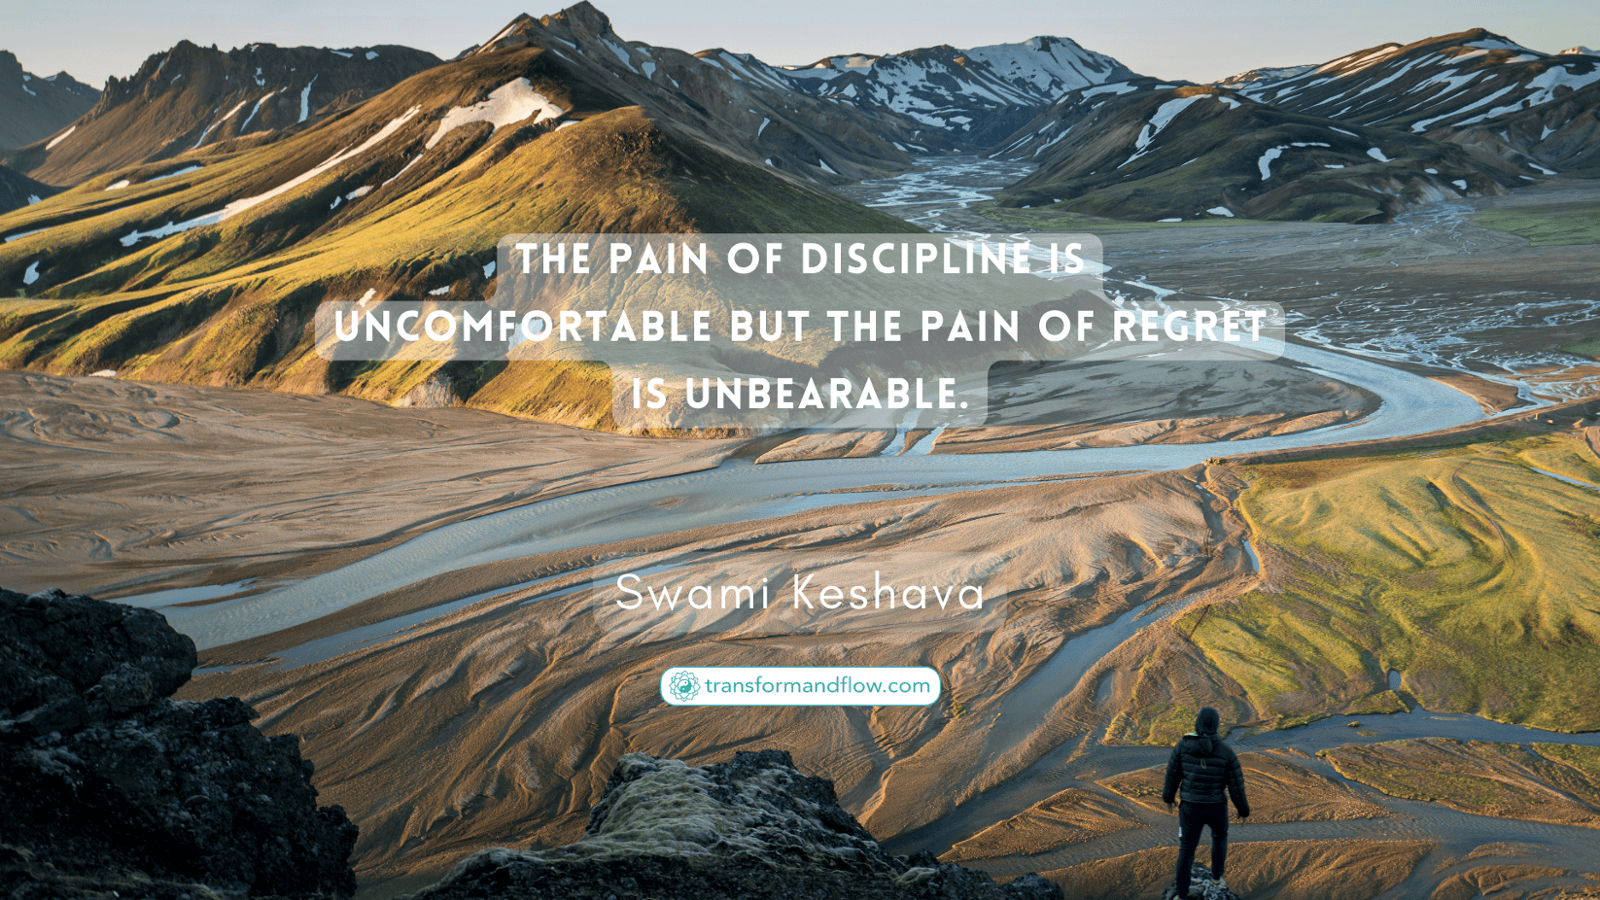 The pain of discipline is uncomfortable but the pain of regret is unbearable. Swami Keshava